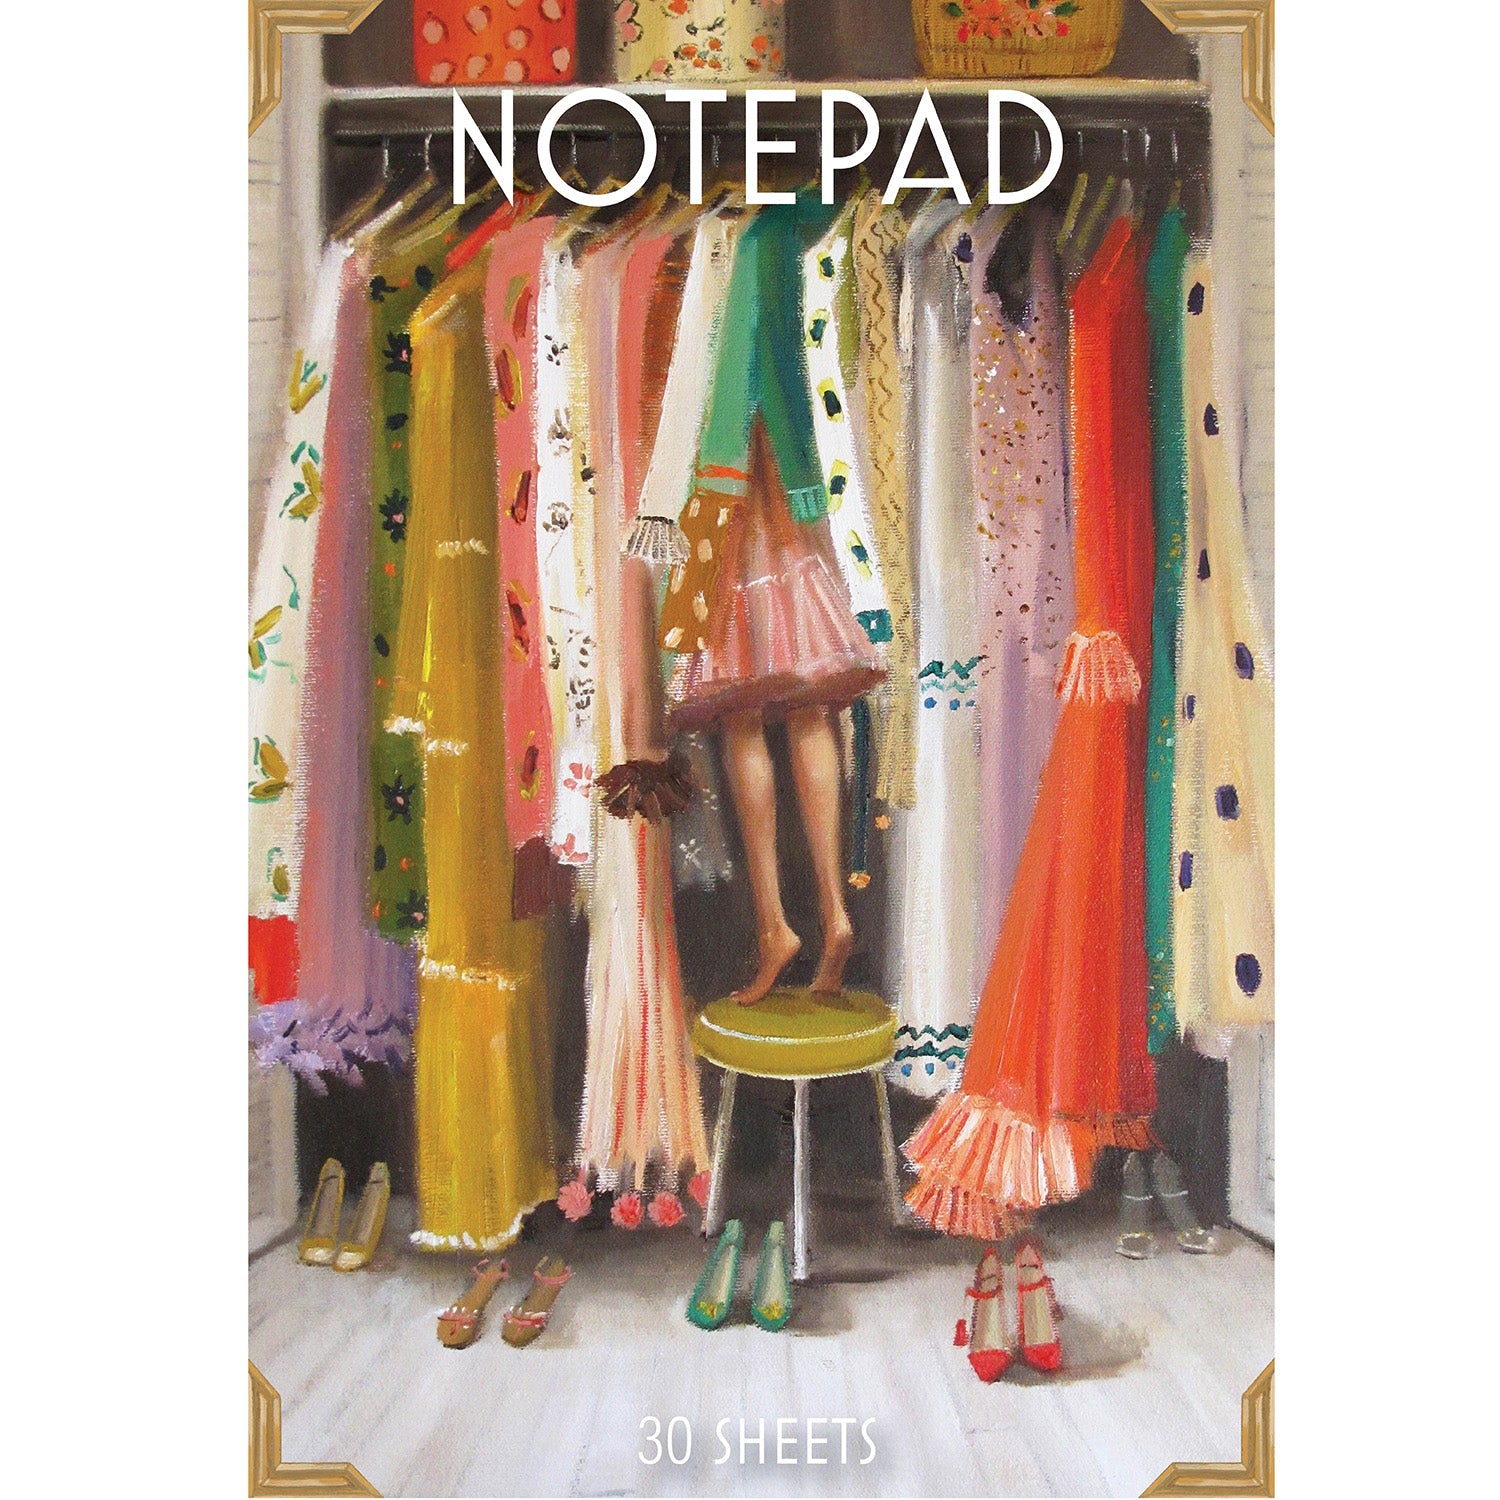 The front cover of the Lonnie Lightfoot Notepad, featuring a painterly illustration of a closet crammed full of colorful vintage dresses with high-heel shoes on the floor. The legs and pink dress of a little girl can be seen as she stands of tip-toes on a stool and leans into the closet to explore the clothes inside. The word &quot;NOTEPAD&quot; is printed in white across the top, and &quot;30 SHEETS&quot; across the bottom. 